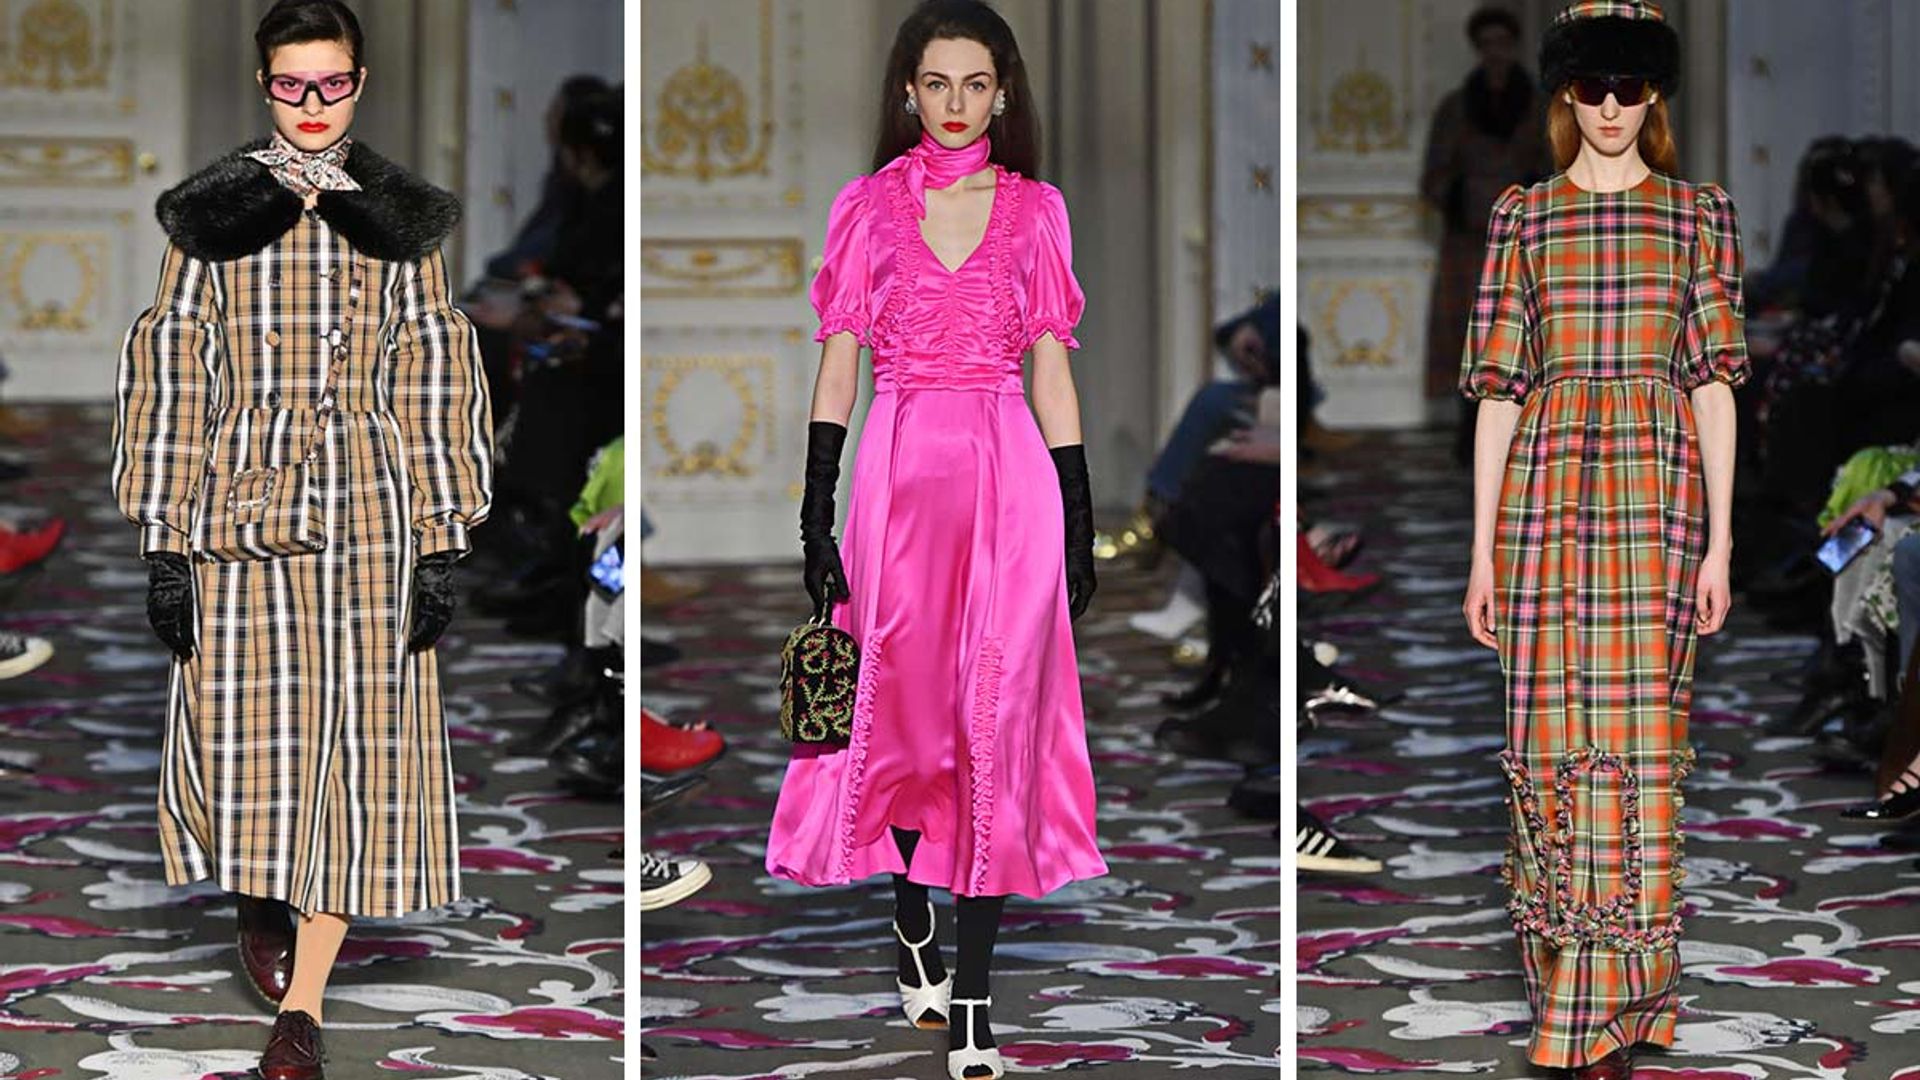 Shrimps royal-inspired London Fashion Week show was influenced by The Queen, Princess Margaret and Princess Diana